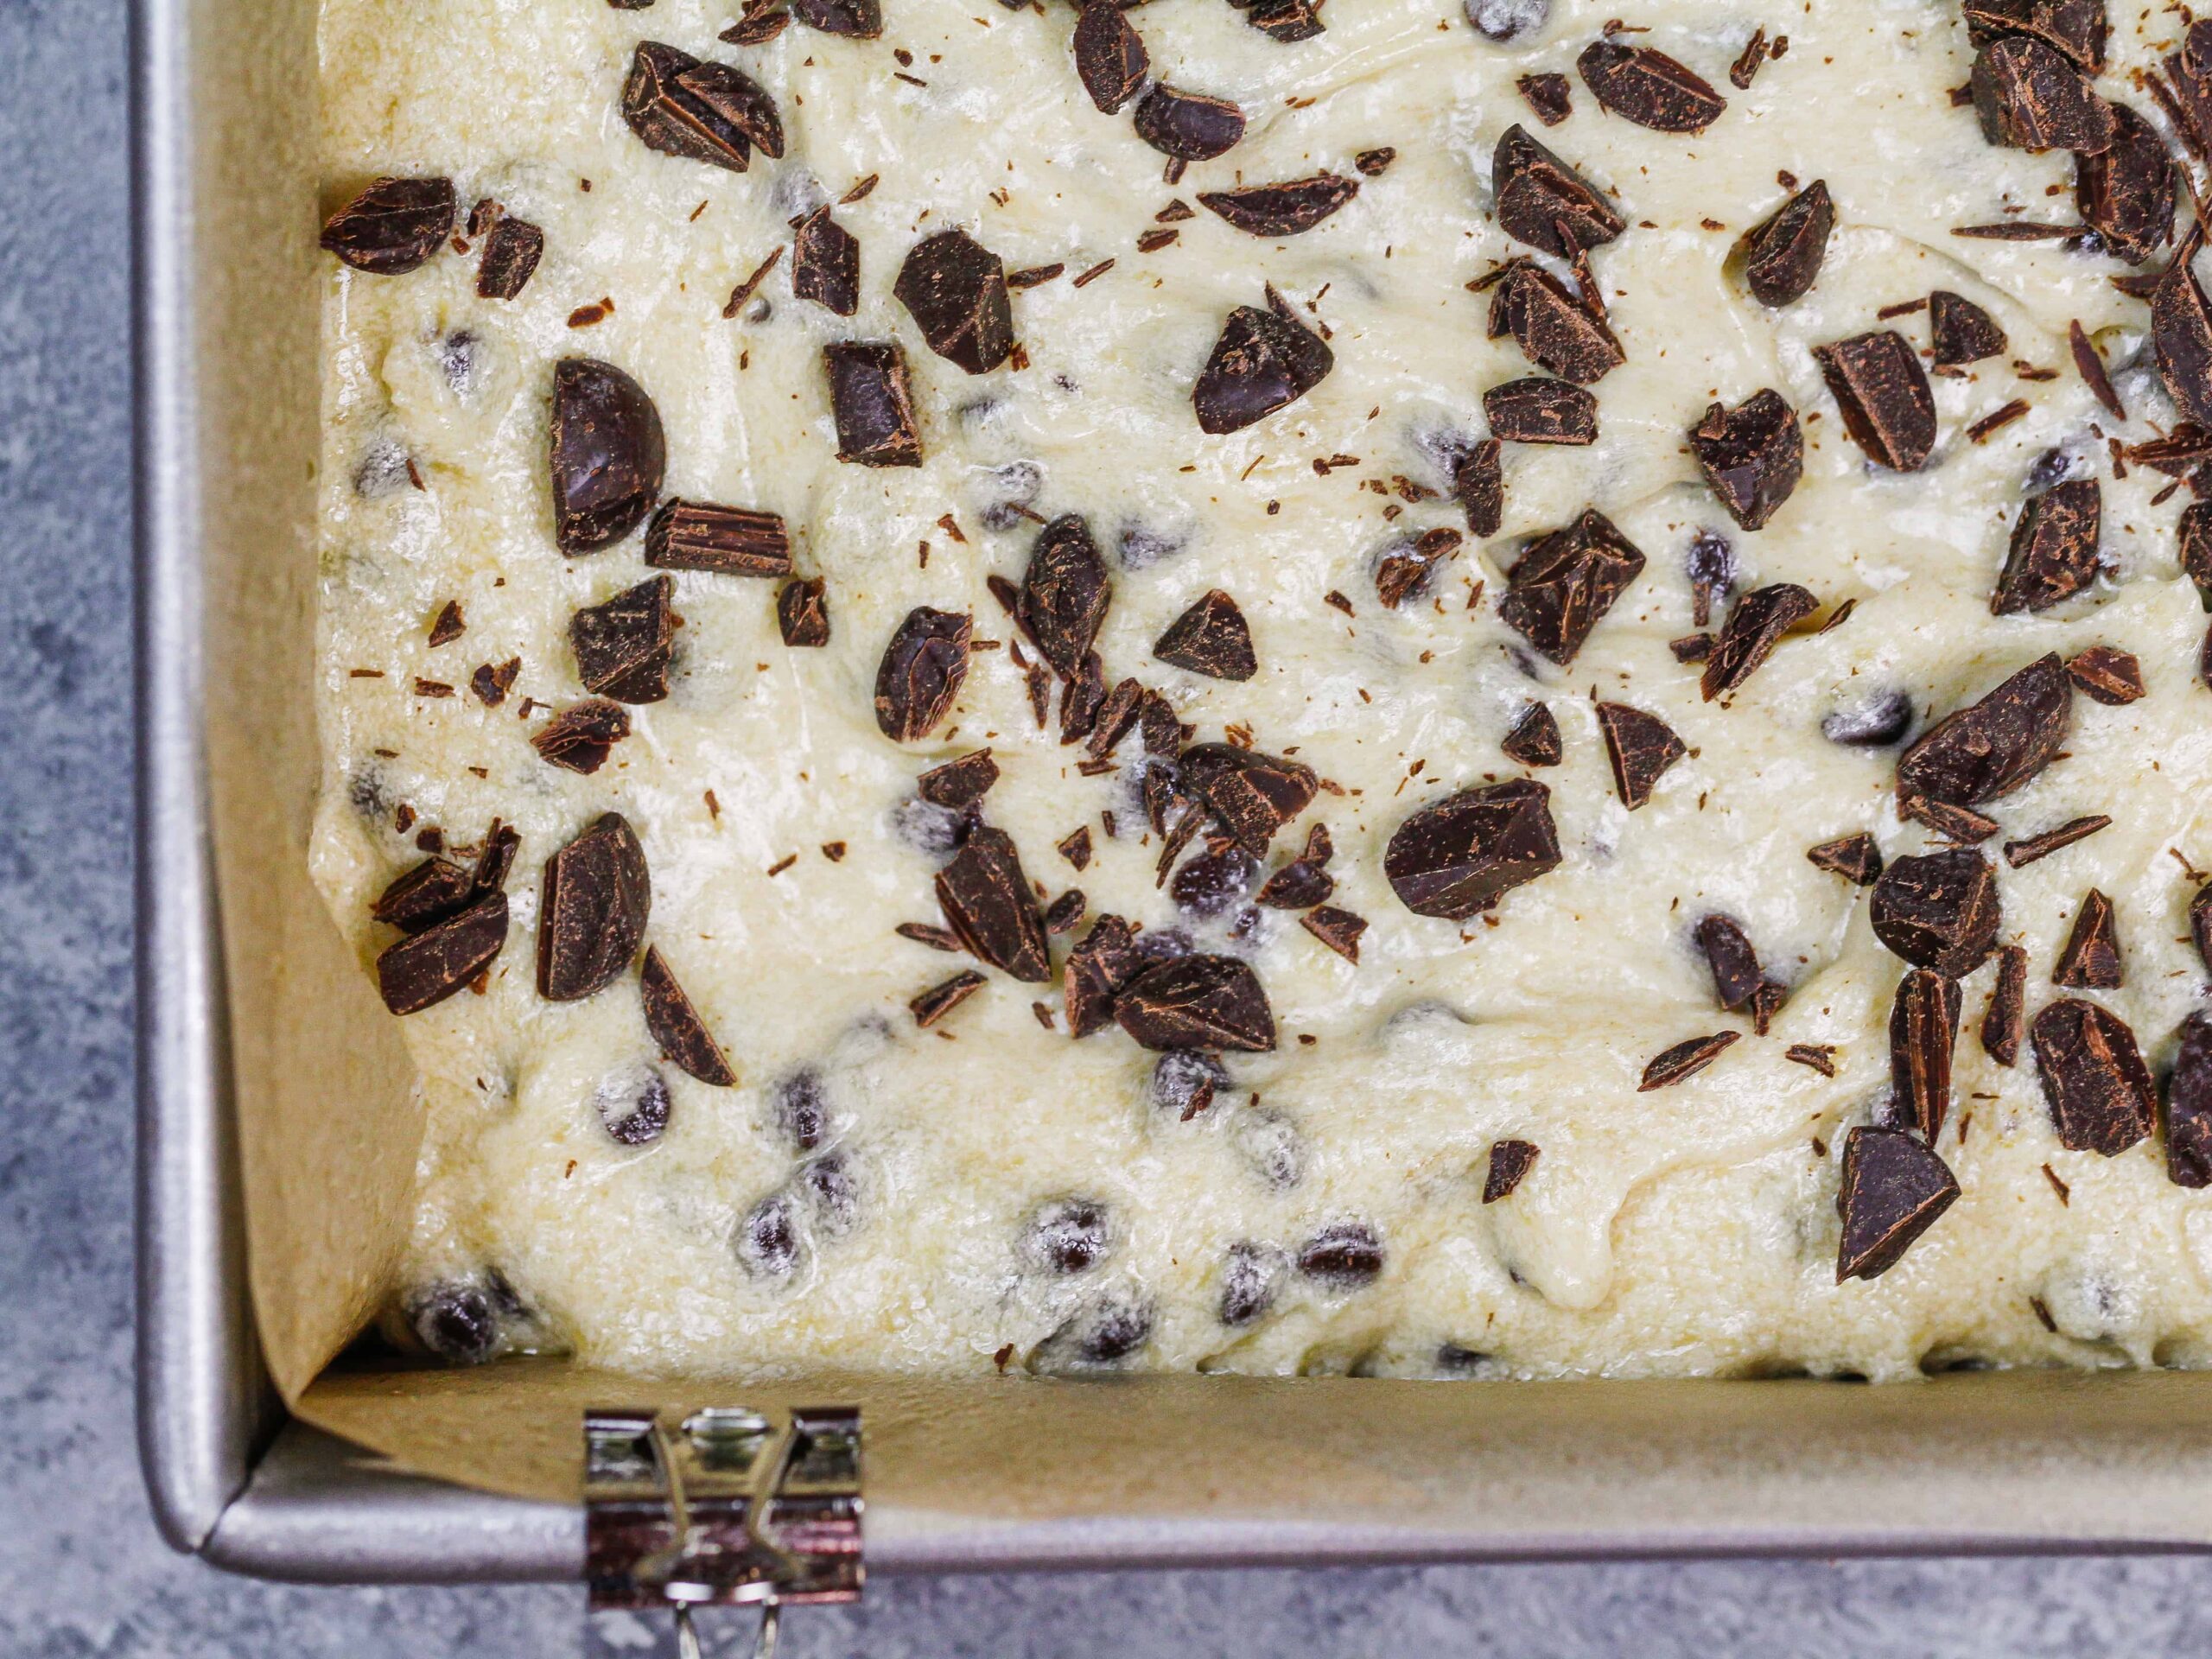 image of chocolate chip banana bar batter in a lined baking pan, ready to be baked in the oven